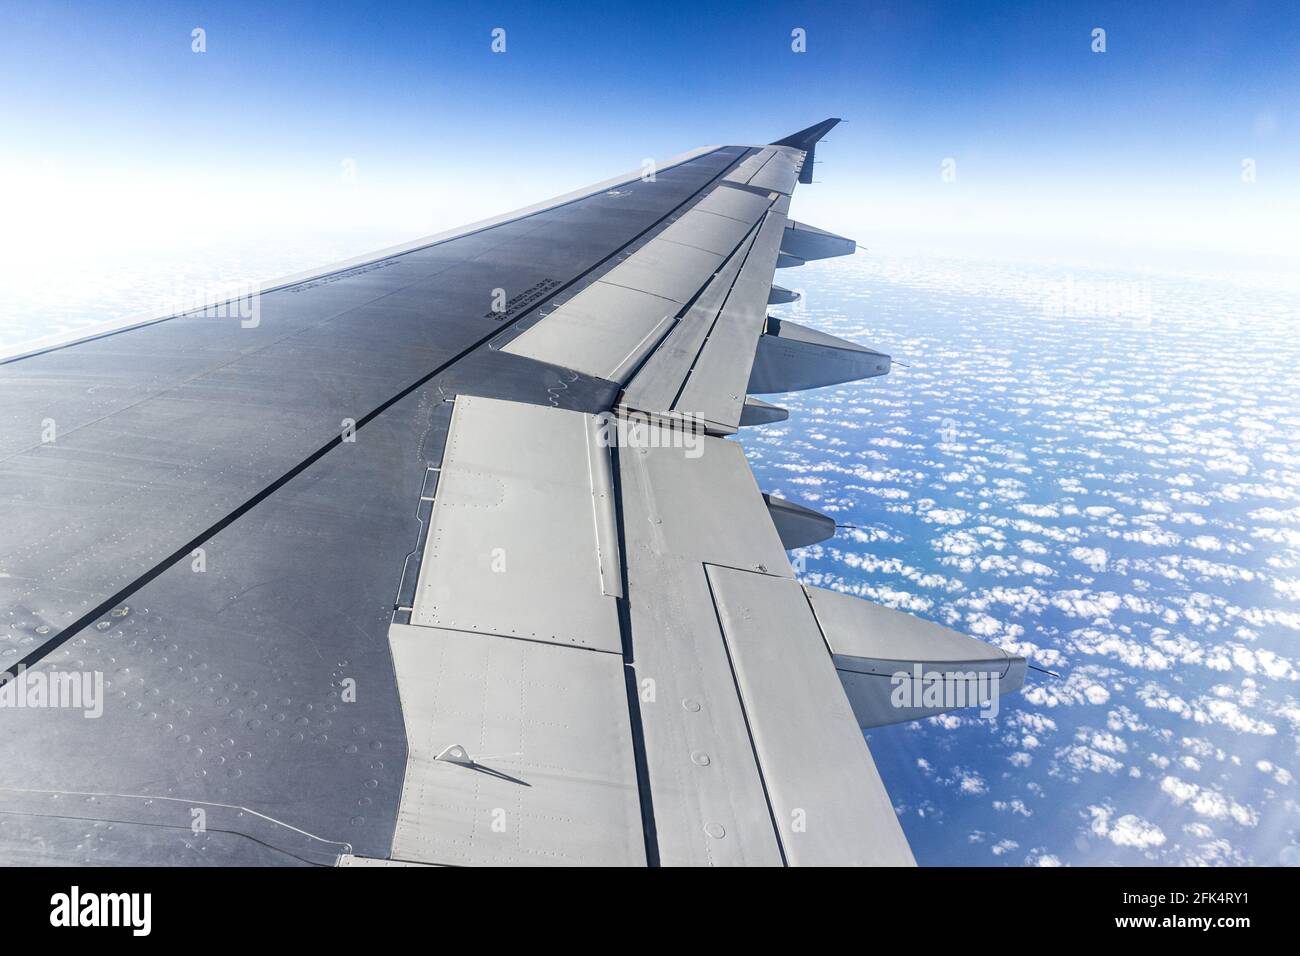 The view from the window of a jet aircraft wing looking down on a blue sky with fluffy white clouds Stock Photo